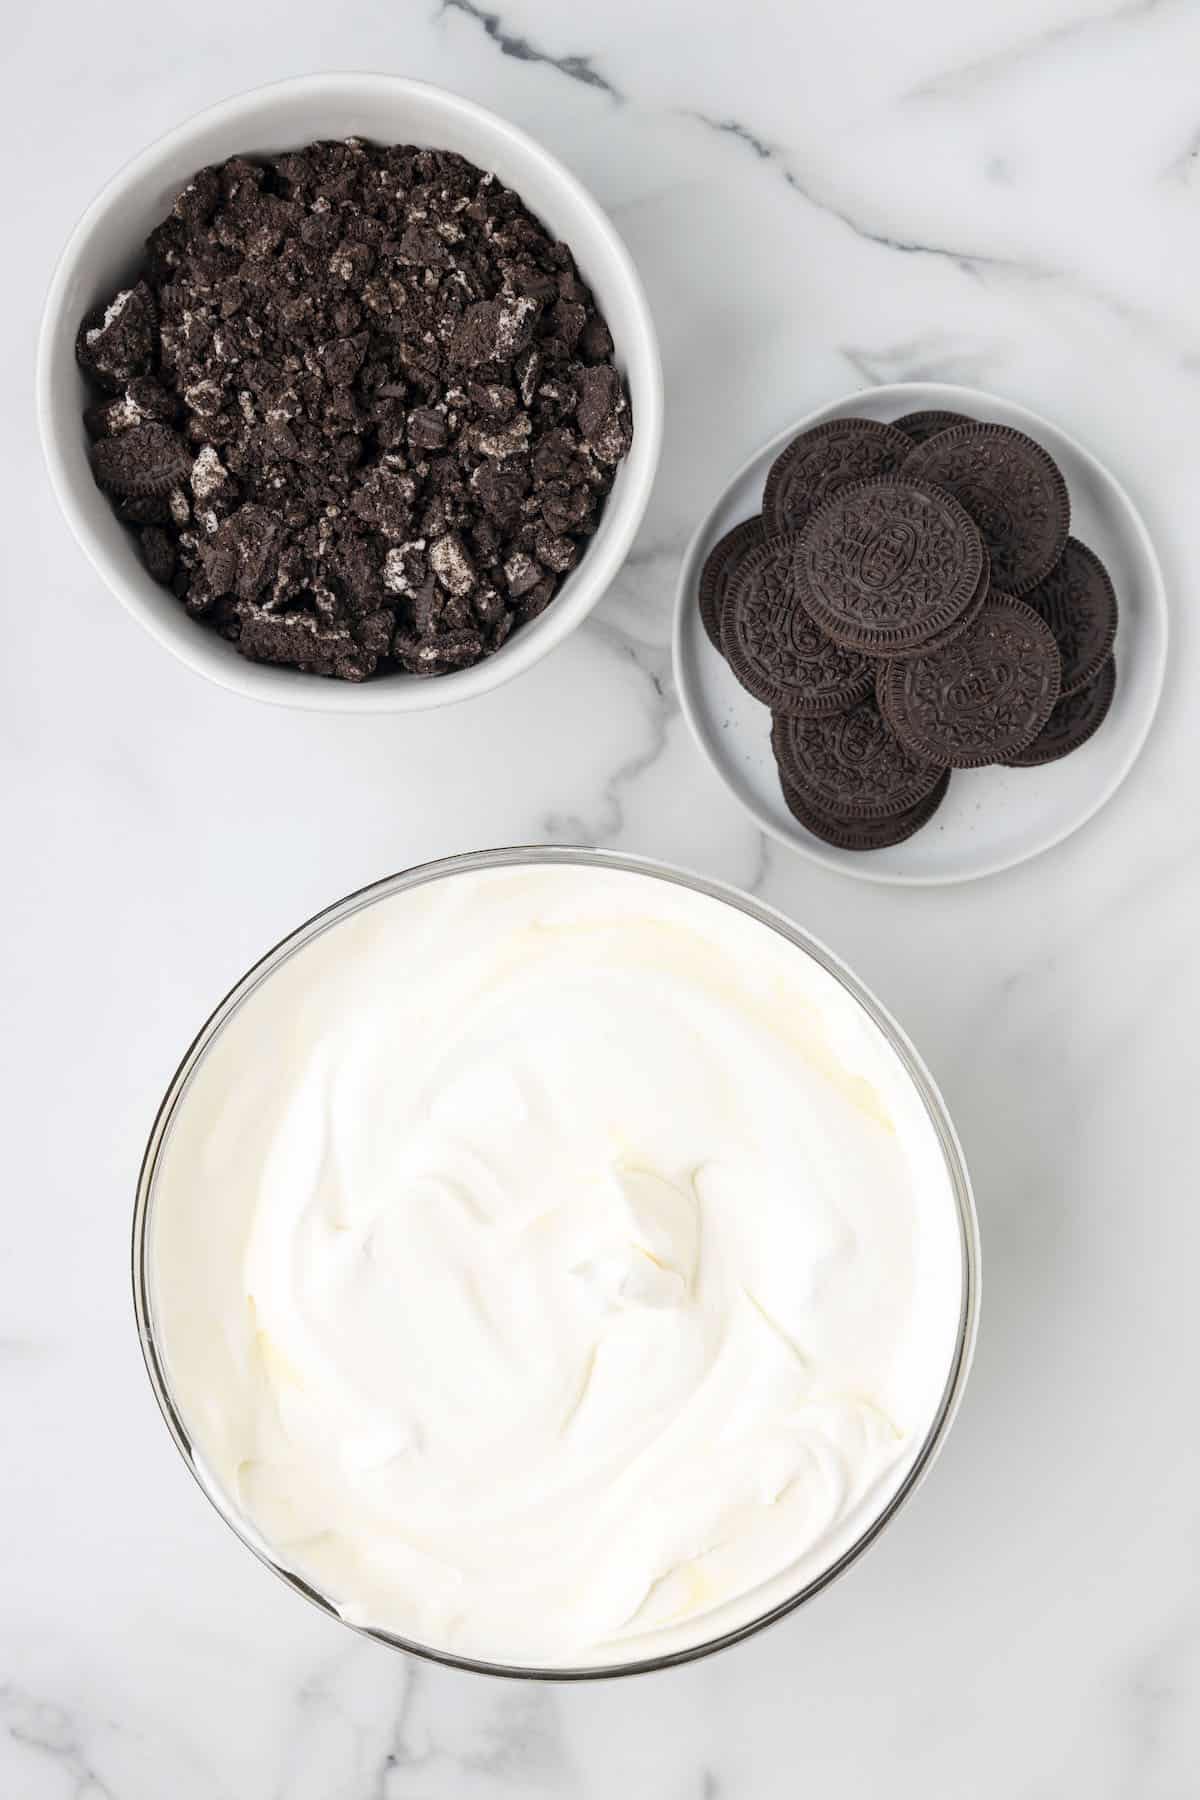 Fluffy and creamy pudding mixture in a bowl surrounded by chocolate oreo cookies.